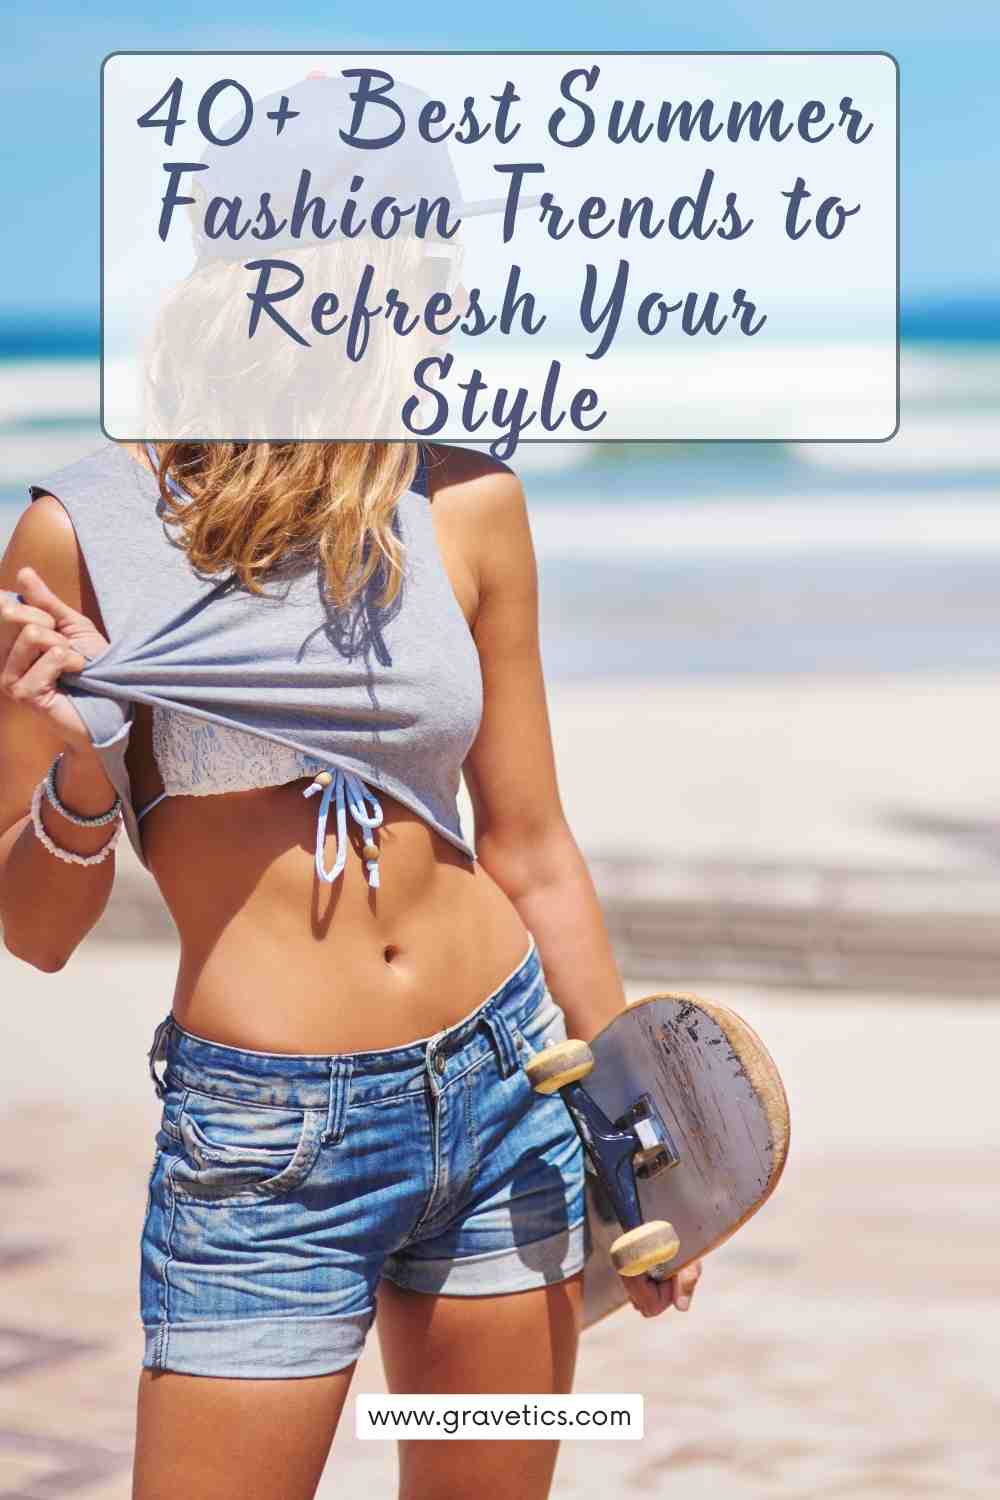 40+ Best Summer Fashion Trends to Refresh Your Style